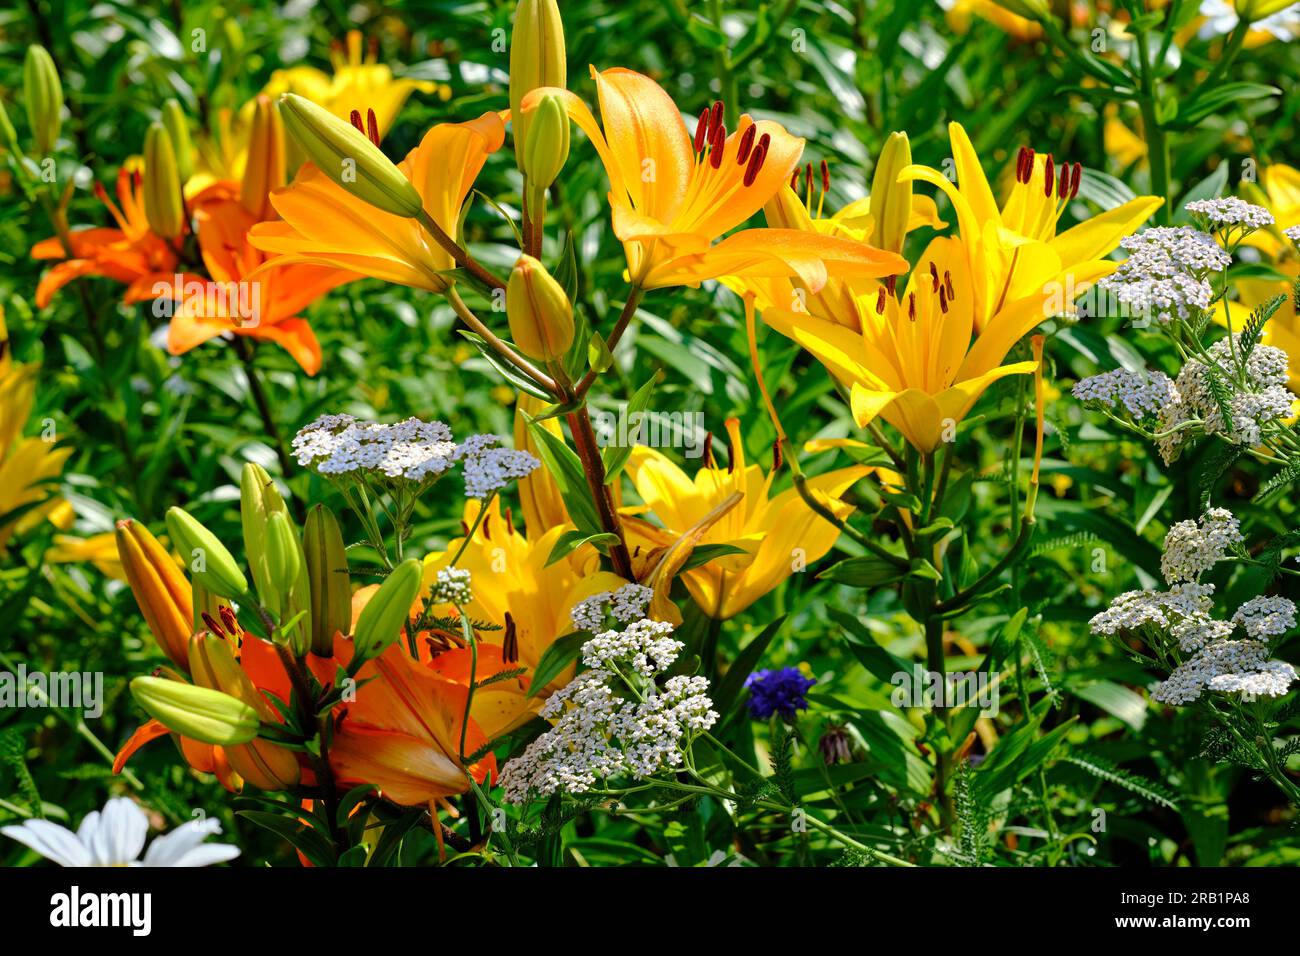 Colorful orange-yellow lily and other flowers blooming in the garden on a sunny day. Summer meadow concept. Close-up view. Stock Photo